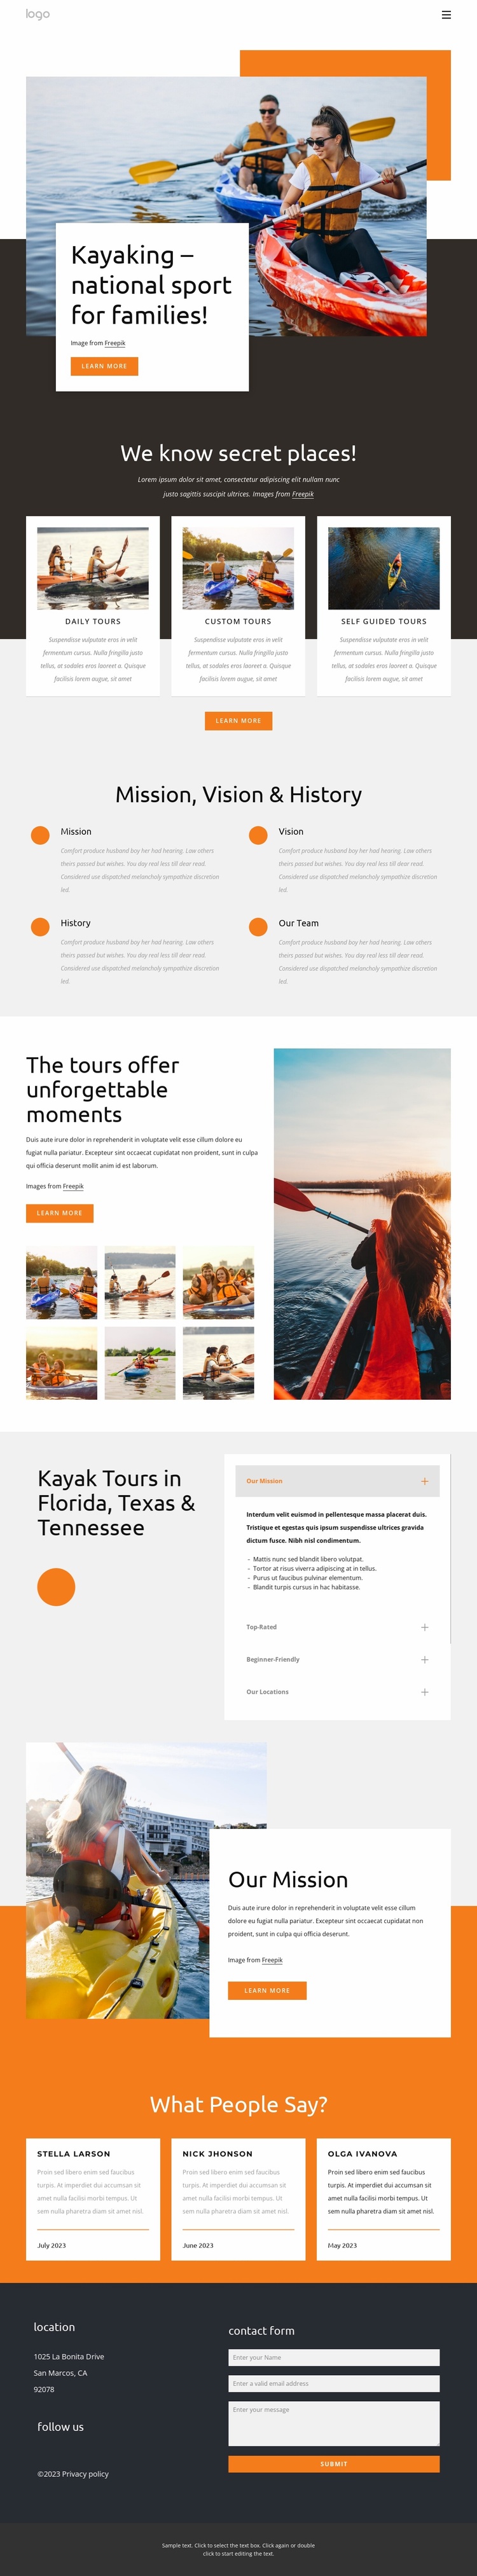 Kayaking - national sport for families eCommerce Template